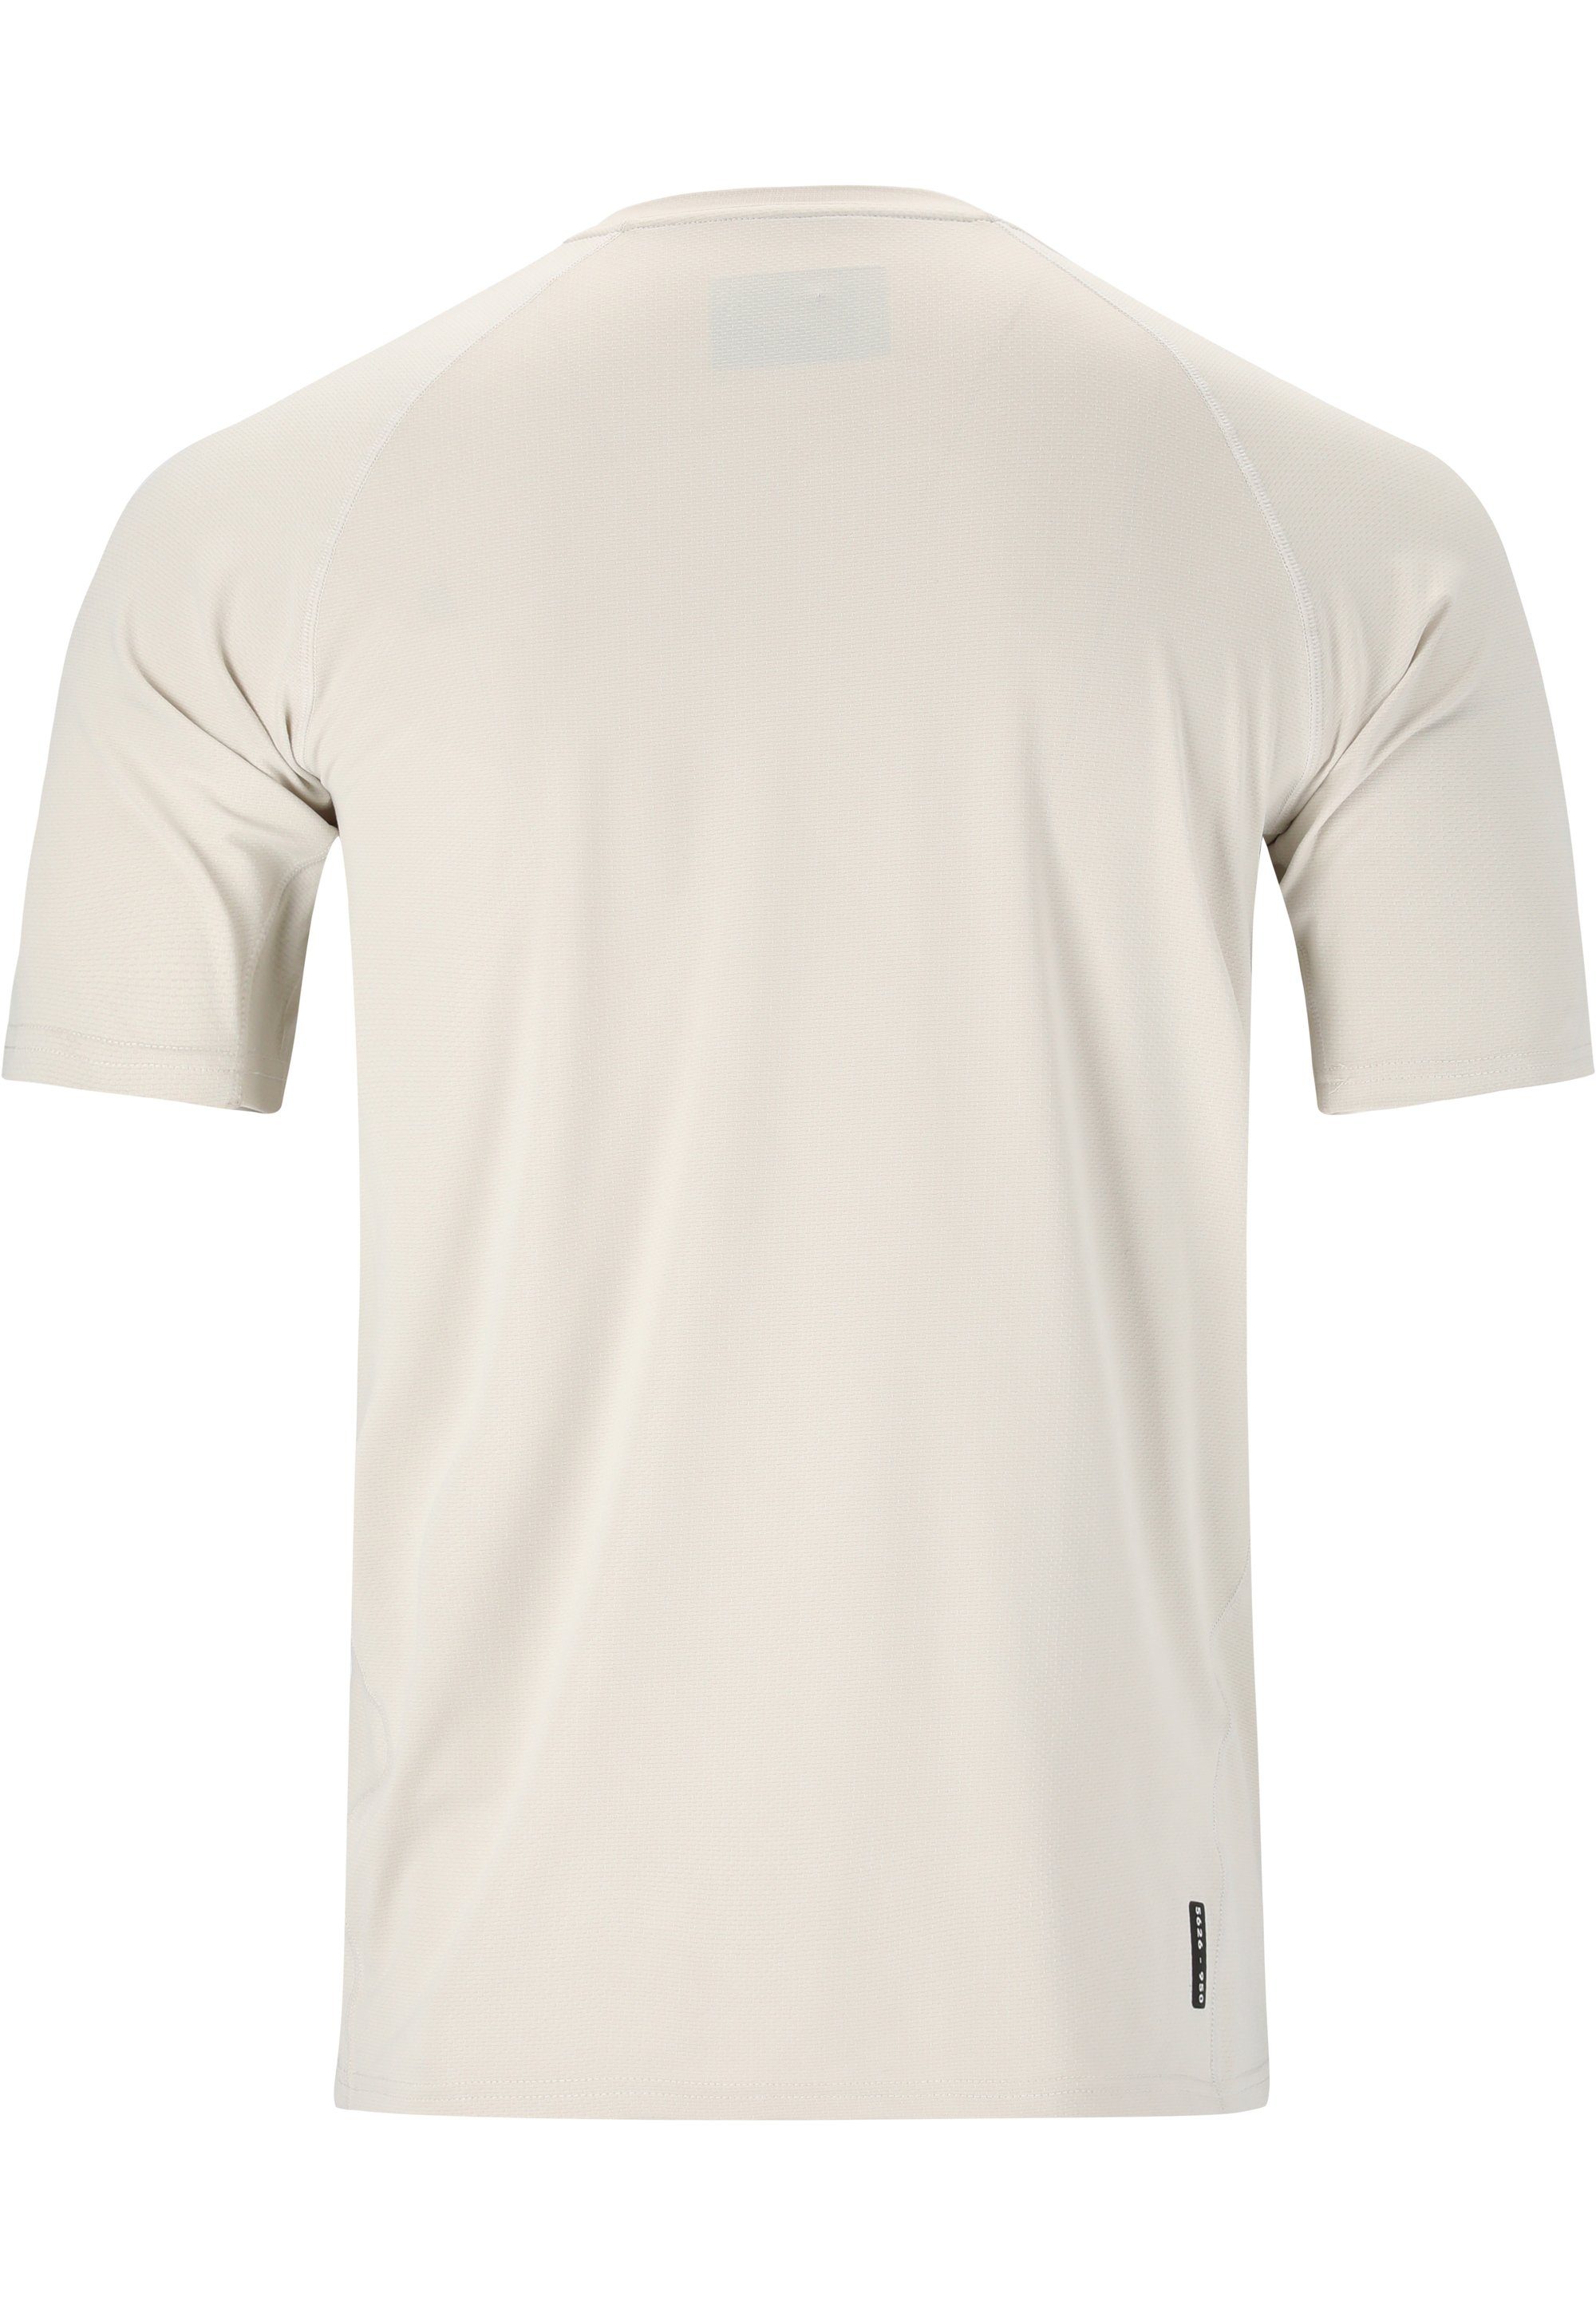 Toscan Silver+-Technologie offwhite Virtus Muskelshirt mit (1-tlg)